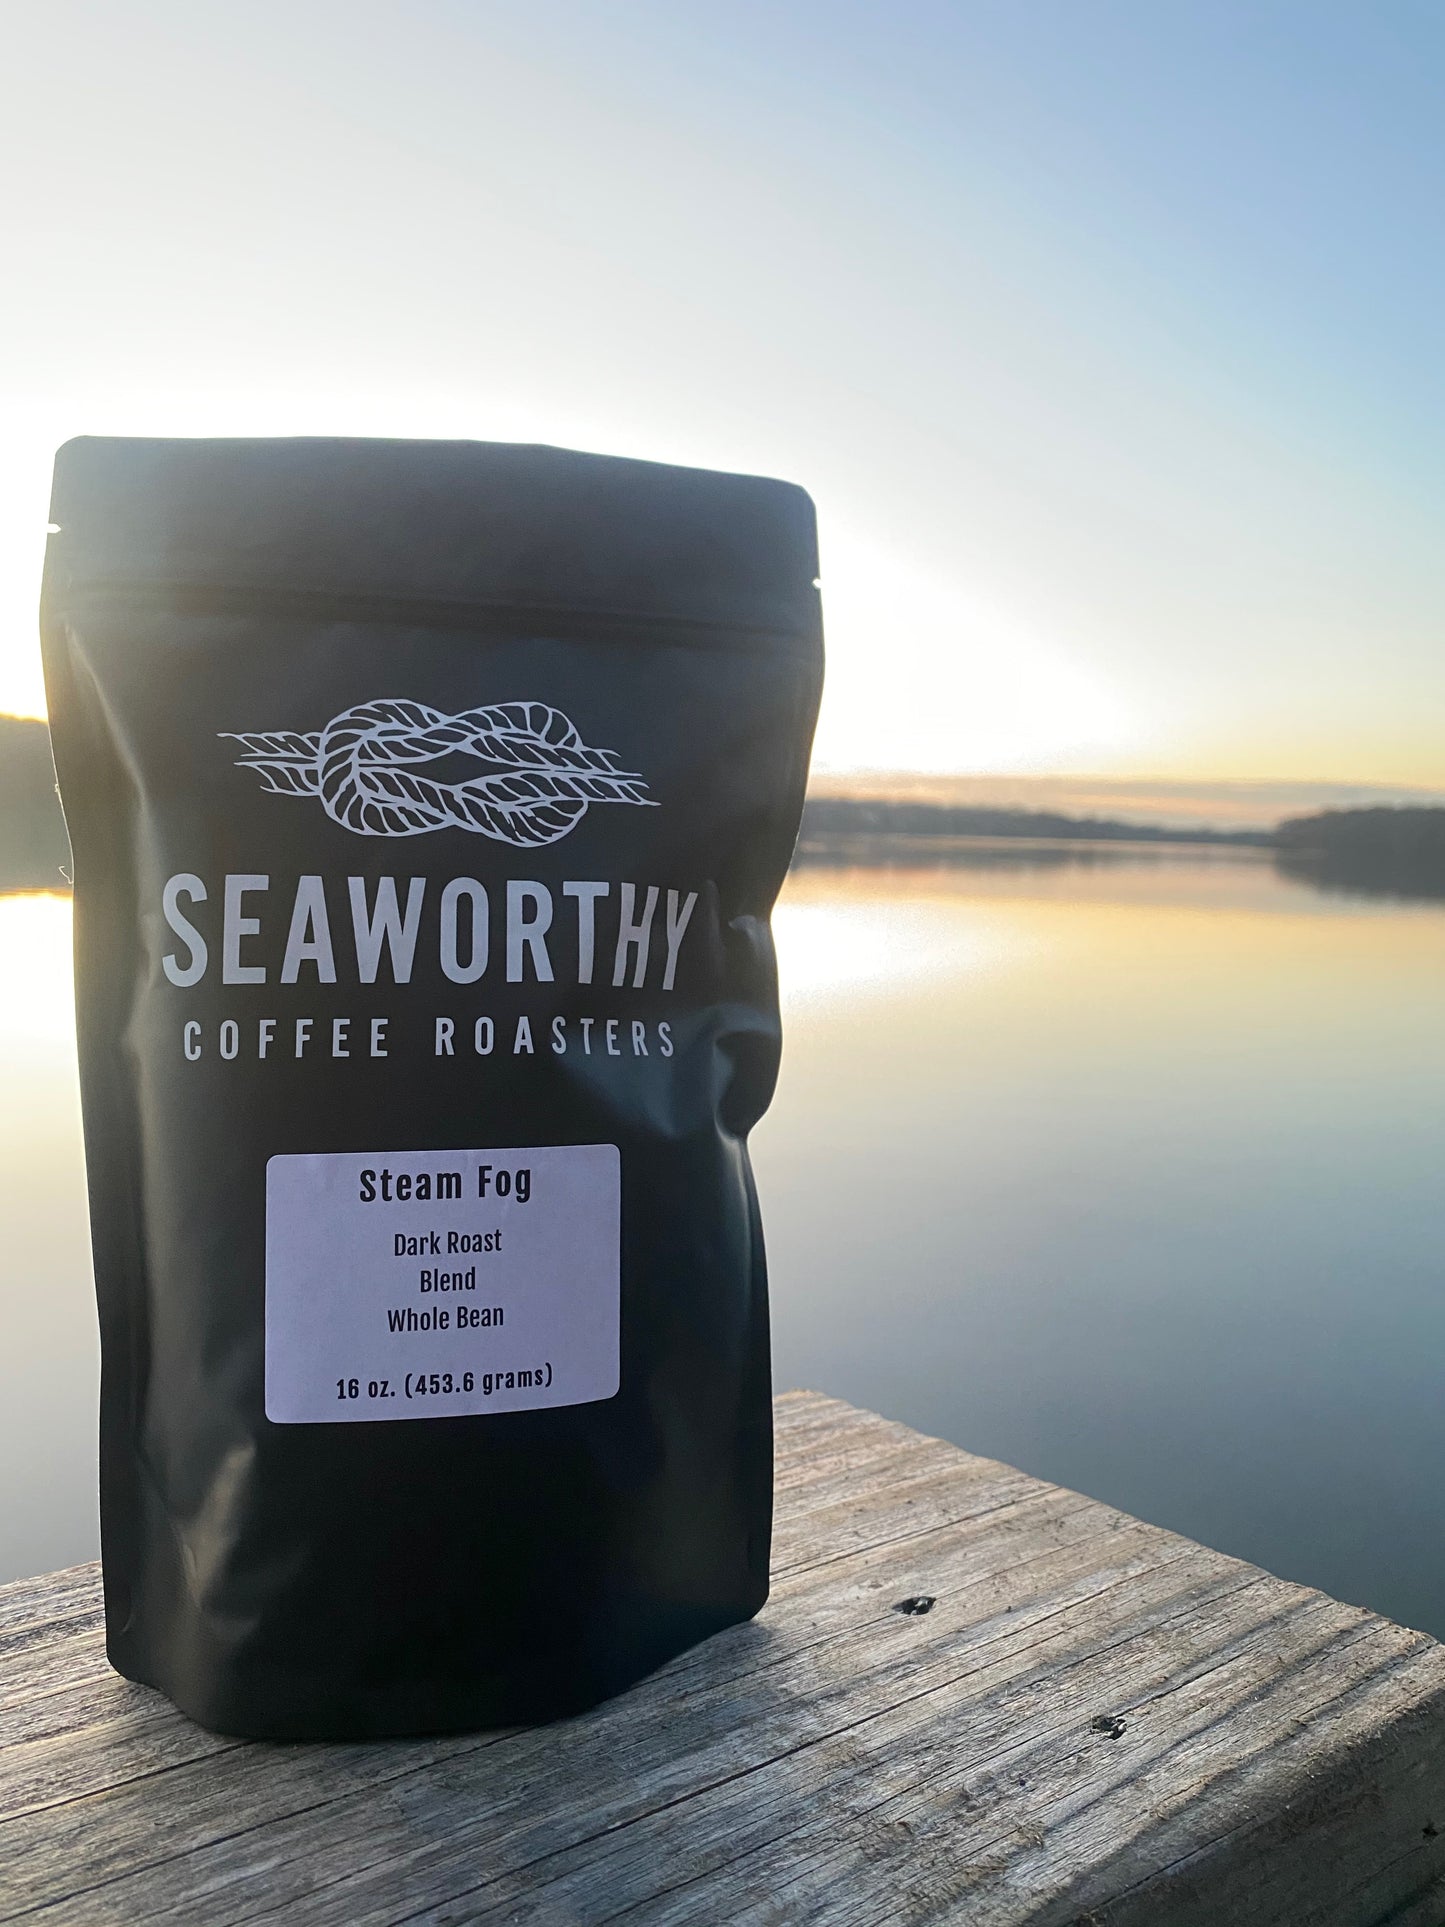 Sweet and ever so smoky, this very dark blend represents the smoky fog that forms when cool air moves over the surface of warm water. Similar to the steam that forms over a hot cup of coffee on a brisk fall day, this blend was inspired by early morning rows on the Narrow River. Blended with beans from Asia, South America, and Africa, Steam Fog is our darkest roast on offer.